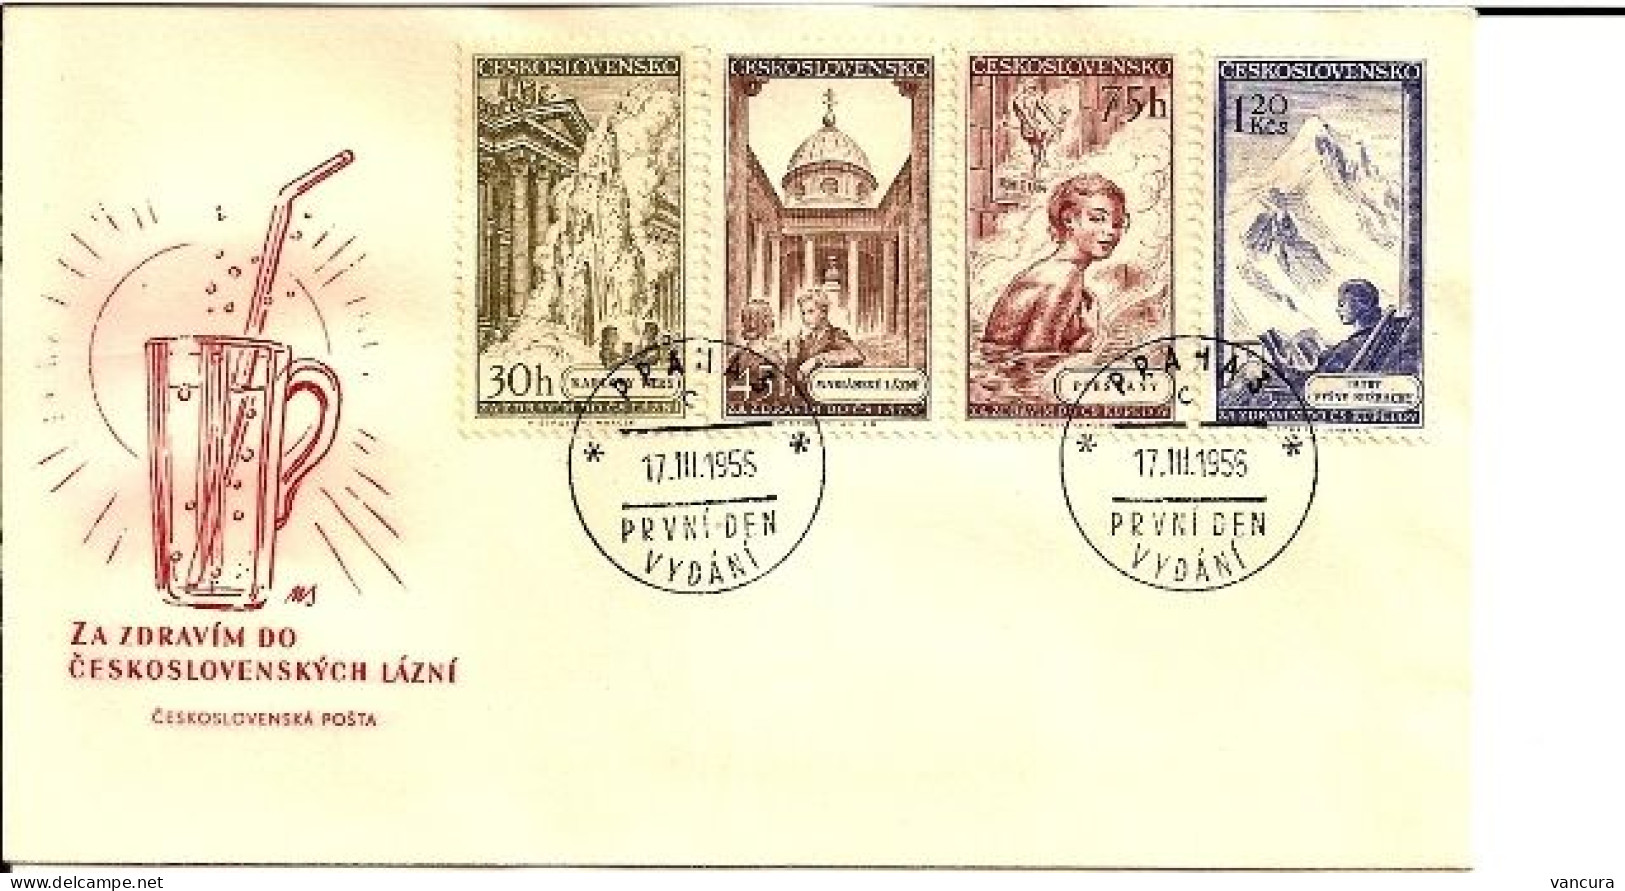 FDC 873-6 Czechoslovakia Spas/Baden 1956 Carlsbad Marienbad Piestany High Tatras NOTICE POOR SCAN, BUT THE FDC IS O.K. - Thermalisme